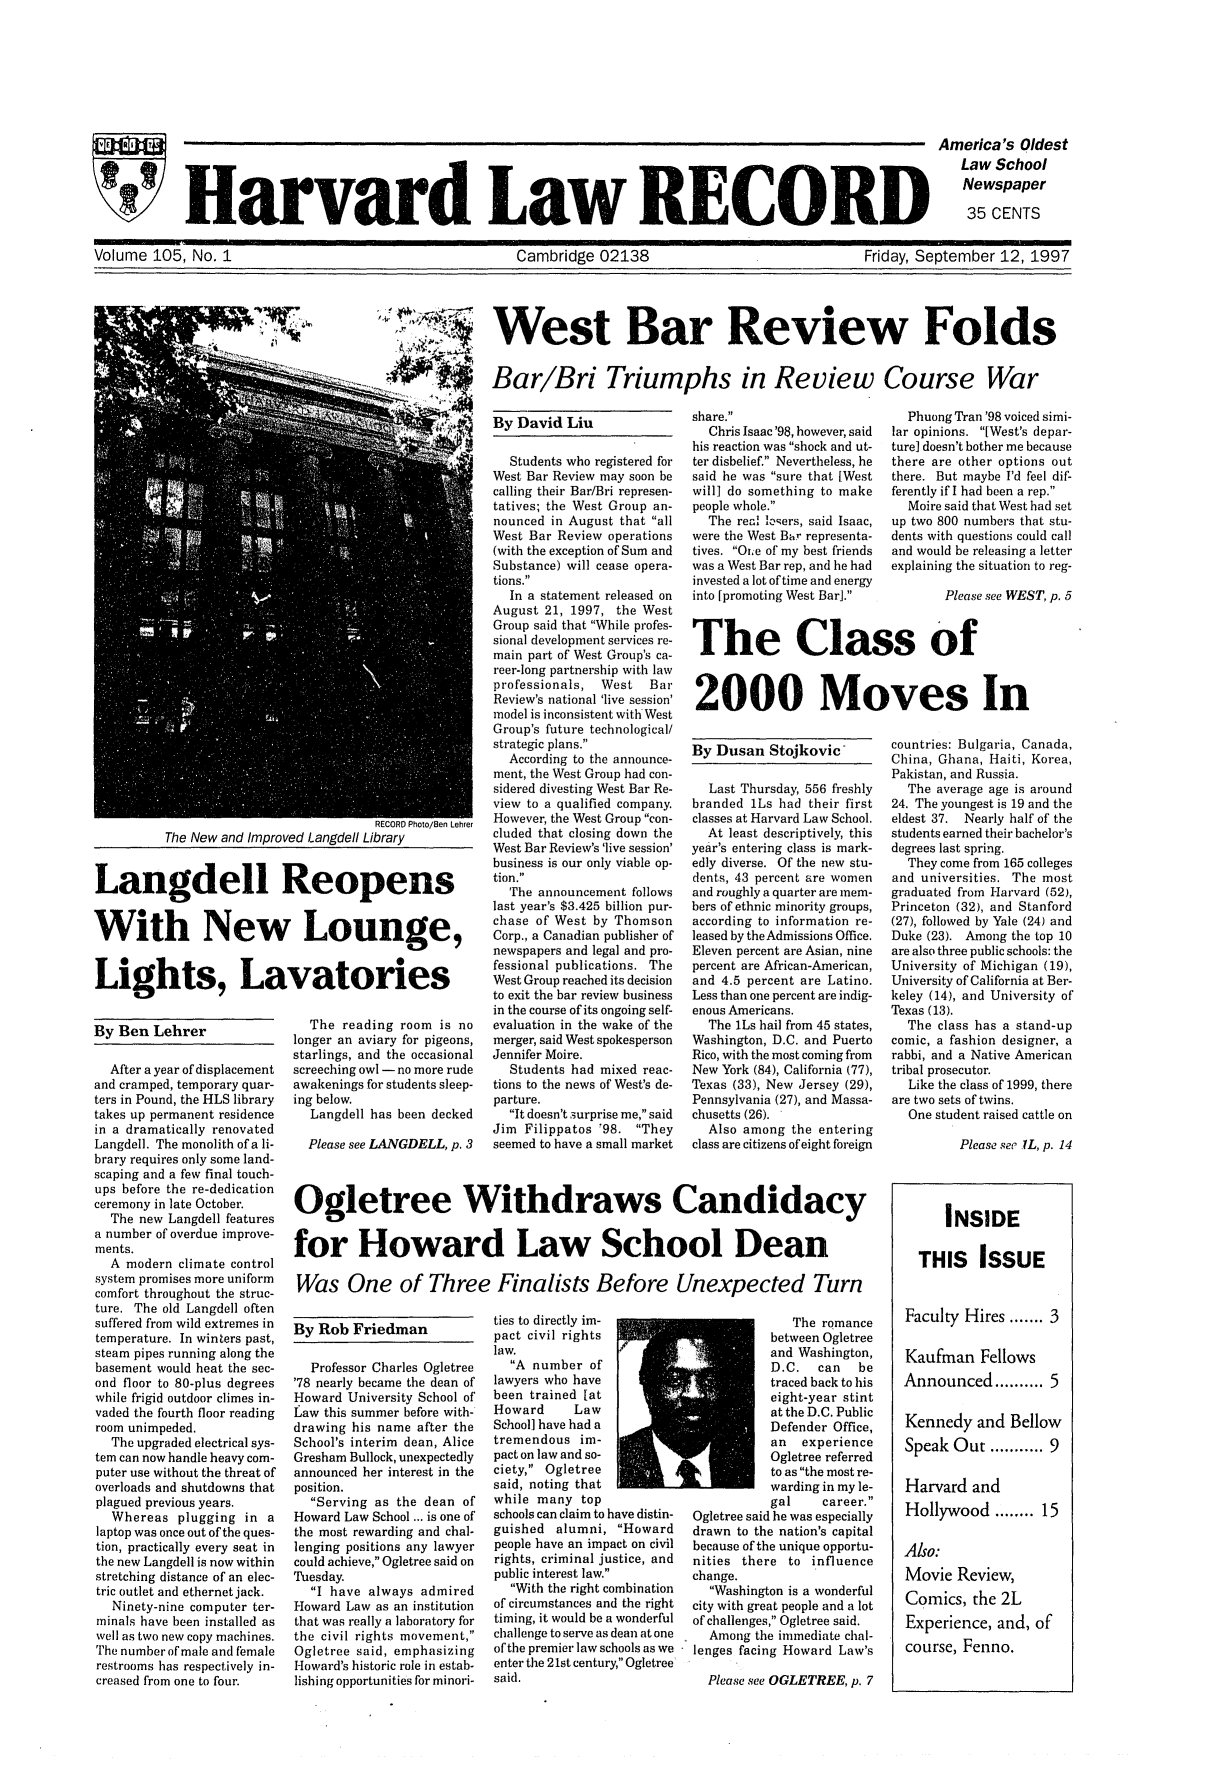 handle is hein.journals/hlrec105 and id is 1 raw text is: Harvard Law RECORDAmerica's OldestLaw SchoolNewspaper35 CENTSVolume 105, No. 1                           Cambridge 02138                      Friday, September 12, 1997West Bar Review FoldsBar/Bri Triumphs in Review Course WarBy Rob FriedmanProfessor Charles Ogletree'78 nearly became the dean ofHoward University School ofLaw this summer before with-drawing his name after theSchool's interim dean, AliceGresham Bullock, unexpectedlyannounced her interest in theposition.Serving as the dean ofHoward Law School ... is one ofthe most rewarding and chal-lenging positions any lawyercould achieve, Ogletree said onTuesday.I have always admiredHoward Law as an institutionthat was really a laboratory forthe civil rights movement,Ogletree said, emphasizingHoward's historic role in estab-lishing opportunities for minori-By David LiuRECORD Photo/Ben LehrerThe New and Improved Langdell LibraryLangdell ReopensWith New Lounge,Lights, LavatoriesBy Ben LehrerAfter a year of displacementand cramped, temporary quar-ters in Pound, the HLS librarytakes up permanent residencein a dramatically renovatedLangdell. The monolith of a li-brary requires only some land-scaping and a few final touch-ups before the re-dedicationceremony in late October.The new Langdell featuresa number of overdue improve-ments.A modern climate controlsystem promises more uniformcomfort throughout the struc-ture. The old Langdell oftensuffered from wild extremes intemperature. In winters past,steam pipes running along thebasement would heat the sec-ond floor to 80-plus degreeswhile frigid outdoor climes in-vaded the fourth floor readingroom unimpeded.The upgraded electrical sys-tem can now handle heavy com-puter use without the threat ofoverloads and shutdowns thatplagued previous years.Whereas plugging in alaptop was once out of the ques-tion, practically every seat inthe new Langdell is now withinstretching distance of an elec-tric outlet and ethernet jack.Ninety-nine computer ter-minals have been installed aswell as two new copy machines.The number of male and femalerestrooms has respectively in-creased from one to four.The reading room is nolonger an aviary for pigeons,starlings, and the occasionalscreeching owl - no more rudeawakenings for students sleep-ing below.Langdell has been deckedPlease see LANGDELL, p. 3Students who registered forWest Bar Review may soon becalling their Bar/Bri represen-tatives; the West Group an-nounced in August that allWest Bar Review operations(with the exception of Sum andSubstance) will cease opera-tions.In a statement released onAugust 21, 1997, the WestGroup said that While profes-sional development services re-main part of West Group's ca-reer-long partnership with lawprofessionals,  West   BarReview's national 'live session'model is inconsistent with WestGroup's future technological/strategic plans.According to the announce-ment, the West Group had con-sidered divesting West Bar Re-view to a qualified company.However, the West Group con-cluded that closing down theWest Bar Review's 'live session'business is our only viable op-tion.The announcement followslast year's $3.425 billion pur-chase of West by ThomsonCorp., a Canadian publisher ofnewspapers and legal and pro-fessional publications. TheWest Group reached its decisionto exit the bar review businessin the course of its ongoing self-evaluation in the wake of themerger, said West spokespersonJennifer Moire.Students had mixed reac-tions to the news of West's de-parture.It doesn't surprise me, saidJim Filippatos '98. Theyseemed to have a small marketties to directly im-pact civil rightslaw.A number oflawyers who havebeen trained [atHoward      LawSchool] have had atremendous im-pact on law and so-ciety, Ogletreesaid, noting thatwhile many topschools can claim to have distin-guished alumni, Howardpeople have an impact on civilrights, criminal justice, andpublic interest law.With the right combinationof circumstances and the righttiming, it would be a wonderfulchallenge to serve as dean at oneof the premier law schools as weenter the 21st century, Ogletreesaid.share.Chris Isaac '98, however, saidhis reaction was shock and ut-ter disbelief. Nevertheless, hesaid he was sure that [Westwill] do something to makepeople whole.The real io'ers, said Isaac,were the West Bar representa-tives. Oi;e of my best friendswas a West Bar rep, and he hadinvested a lot of time and energyinto [promoting West Bar].The romancebetween Ogletreeand Washington,D. C.  can   betraced back to hiseight-year stintat the D.C. PublicDefender Office,an experienceOgletree referredto as the most re-warding in my le-gal     career.Ogletree said he was especiallydrawn to the nation's capitalbecause of the unique opportu-nities there to influencechange.Washington is a wonderfulcity with great people and a lotof challenges, Ogletree said.Among the immediate chal-lenges facing Howard Law'sPlease see OGLETREE, p. 7Phuong Tran '98 voiced simi-lar opinions. [West's depar-ture] doesn't bother me becausethere are other options outthere. But maybe I'd feel dif-ferently if I had been a rep.Moire said that West had setup two 800 numbers that stu-dents with questions could calland would be releasing a letterexplaining the situation to reg-Please see WEST, p. 5The Class of2000 Moves InBy Dusan Stojkovic -Last Thursday, 556 freshlybranded 1Ls had their firstclasses at Harvard Law School.At least descriptively, thisyear's entering class is mark-edly diverse. Of the new stu-dents, 43 percent are womenand roughly a quarter are mem-bers of ethnic minority groups,according to information re-leased by the Admissions Office.Eleven percent are Asian, ninepercent are African-American,and 4.5 percent are Latino.Less than one percent are indig-enous Americans.The 1Ls hail from 45 states,Washington, D.C. and PuertoRico, with the most coming fromNew York (84), California (77),Texas (33), New Jersey (29),Pennsylvania (27), and Massa-chusetts (26).Also among the enteringclass are citizens of eight foreigncountries: Bulgaria, Canada,China, Ghana, Haiti, Korea,Pakistan, and Russia.The average age is around24. The youngest is 19 and theeldest 37.  Nearly half of thestudents earned their bachelor'sdegrees last spring.They come from 165 collegesand universities. The mostgraduated from Harvard (52),Princeton (32), and Stanford(27), followed by Yale (24) andDuke (23). Among the top 10are also three public schools: theUniversity of Michigan (19),University of California at Ber-keley (14), and University ofTexas (13).The class has a stand-upcomic, a fashion designer, arabbi, and a Native Americantribal prosecutor.Like the class of 1999, thereare two sets of twins.One student raised cattle onPlease see IL, p. 14INSIDETHIS ISSUEFaculty Hires ....... 3Kaufman FellowsAnnounced......      5Kennedy and BellowSpeak Out ........9Harvard andHollywood....15Also:Movie Review,Comics, the 2LExperience, and, ofcourse, Fenno.Ogletree Withdraws Candidacyfor Howard Law School DeanWas One of Three Finalists Before Unexpected Turn